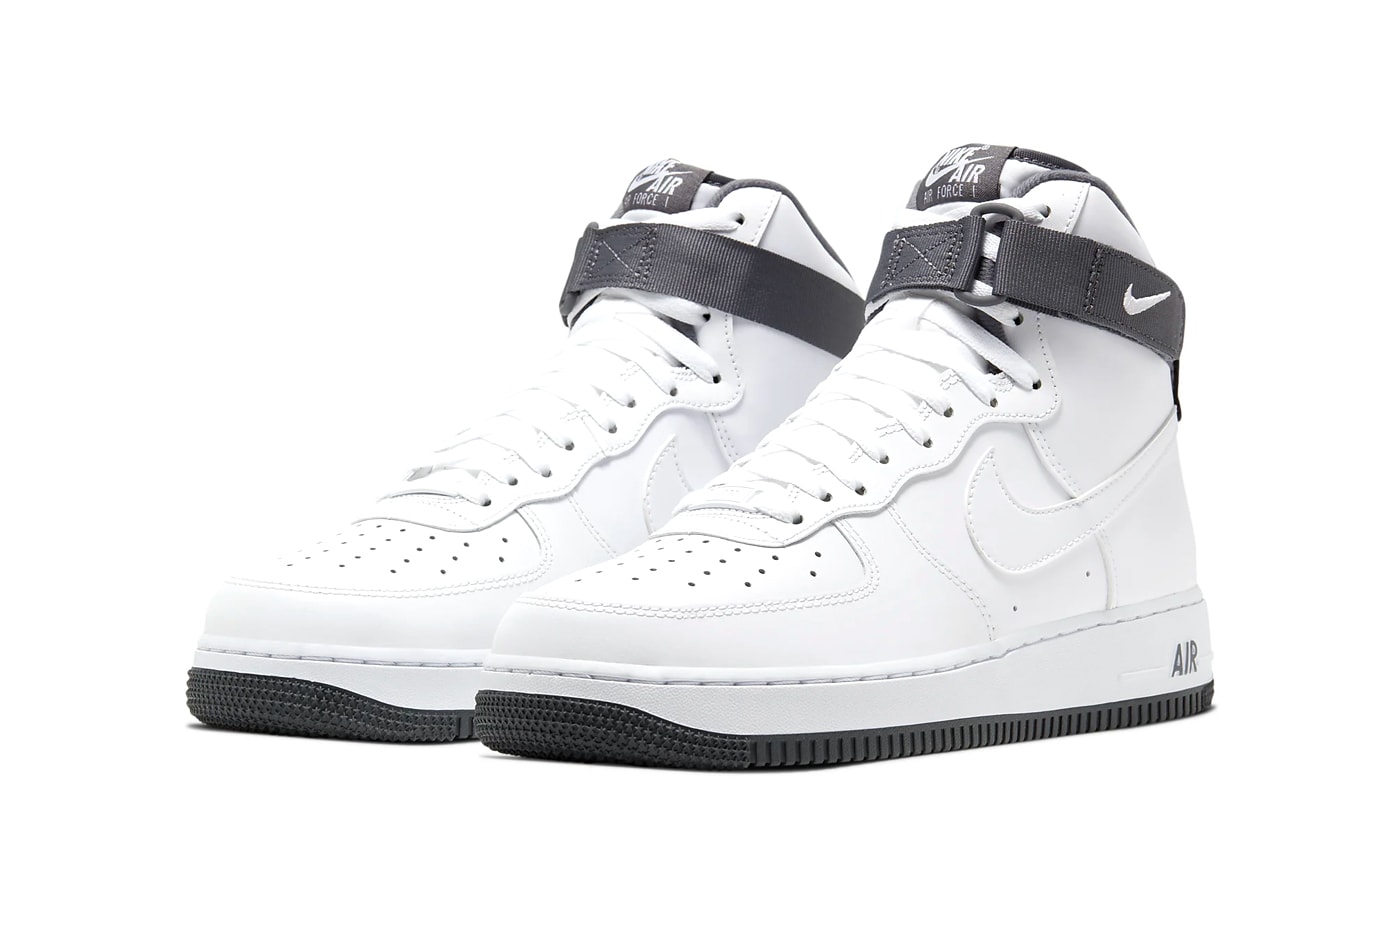 Nike Air Force 1 High 07 lv8 2 White Dark Gray CD0910 100 shoes sneakers menswear footwear kicks trainers runners basketball spring summer 2020 collection swoosh streetwear check